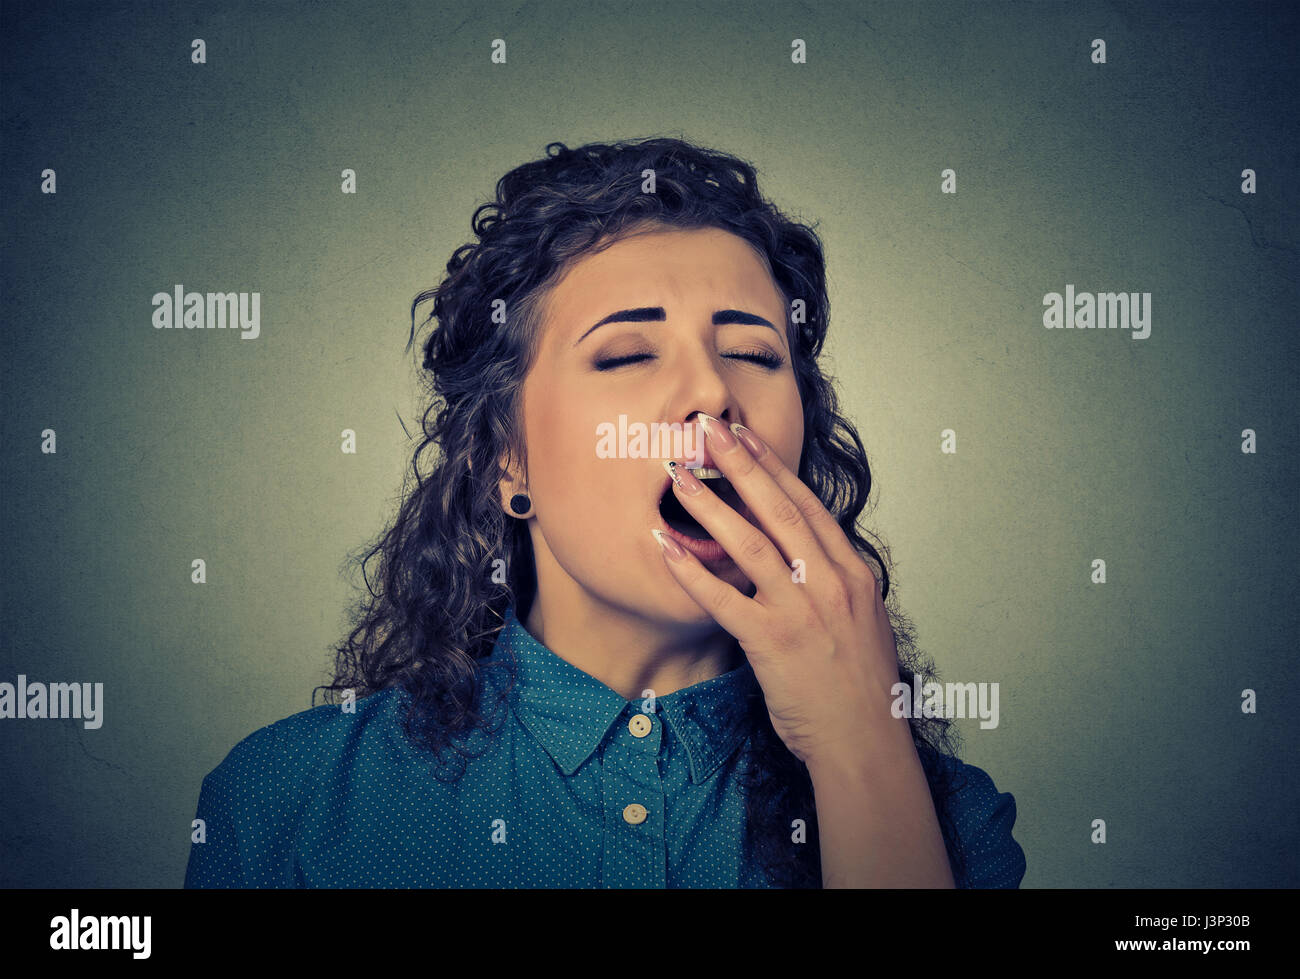 It is too early for meeting. Closeup portrait sleepy young woman with wide open mouth yawning eyes closed looking bored isolated on gray wall backgrou Stock Photo